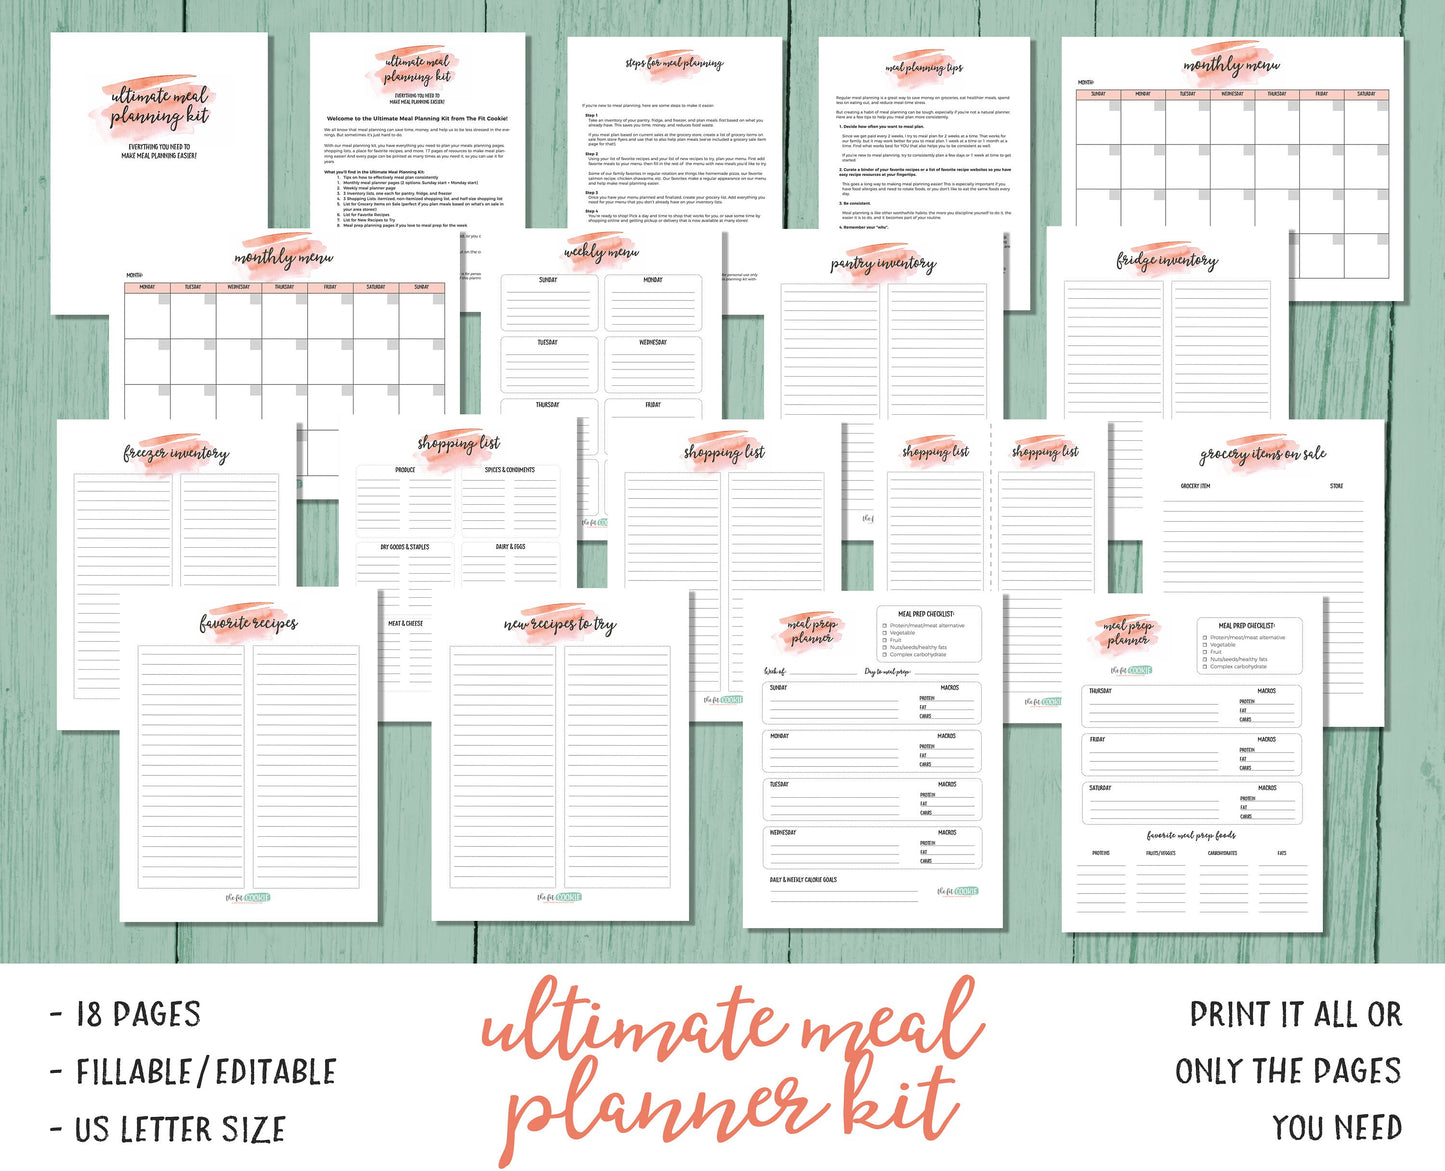 Ultimate Meal Planning Kit